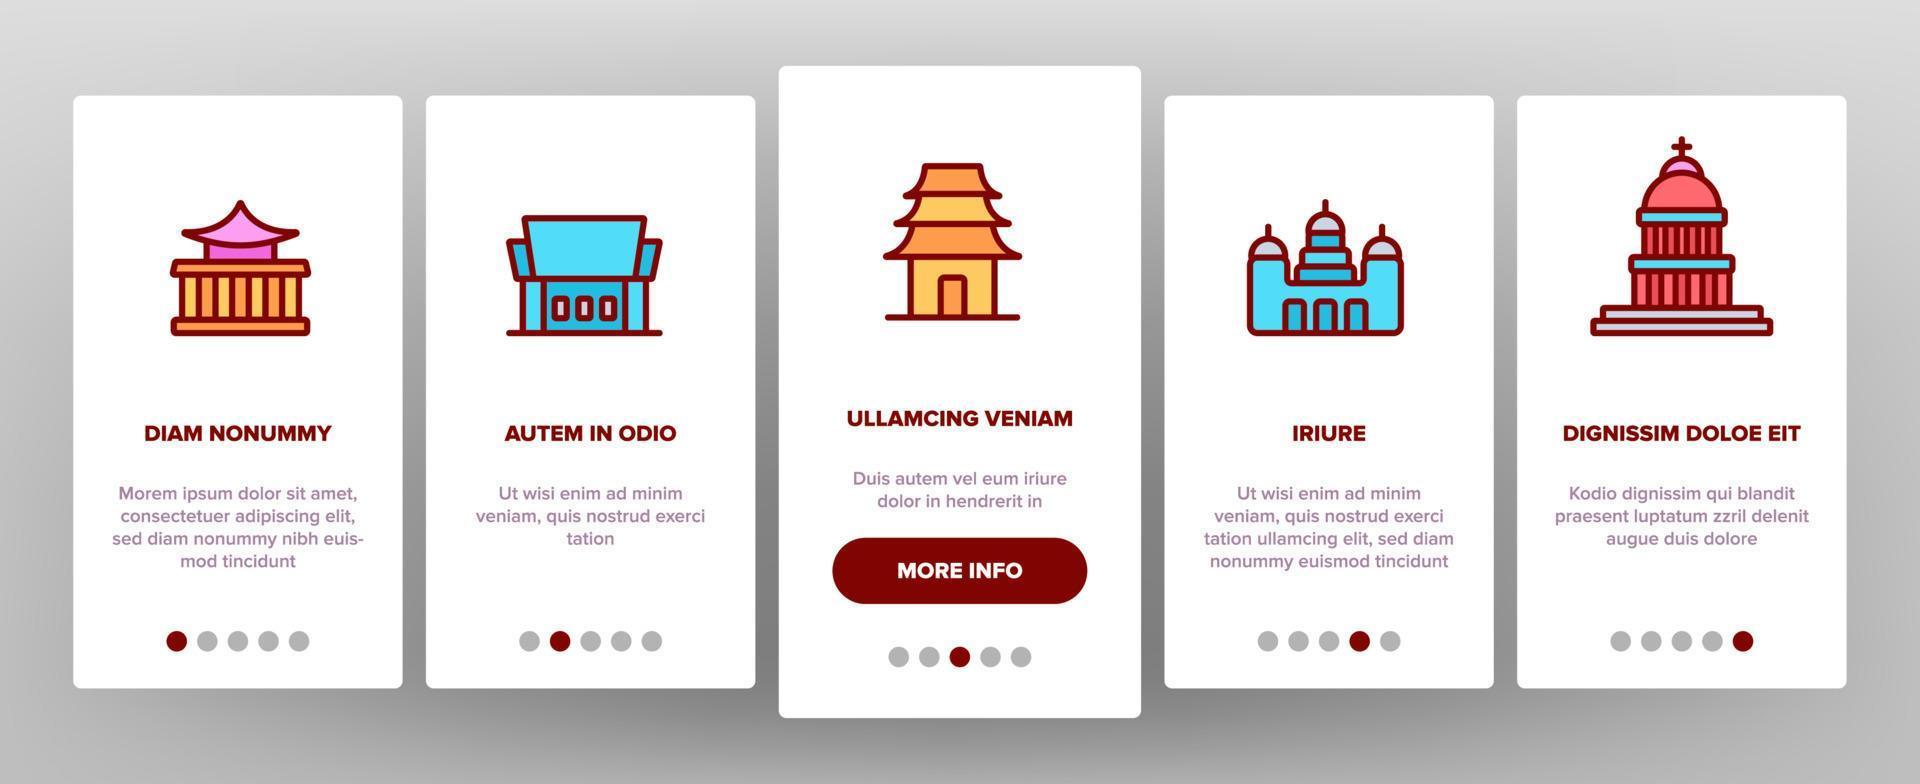 Temple Architecture Building Onboarding Icons Set Vector